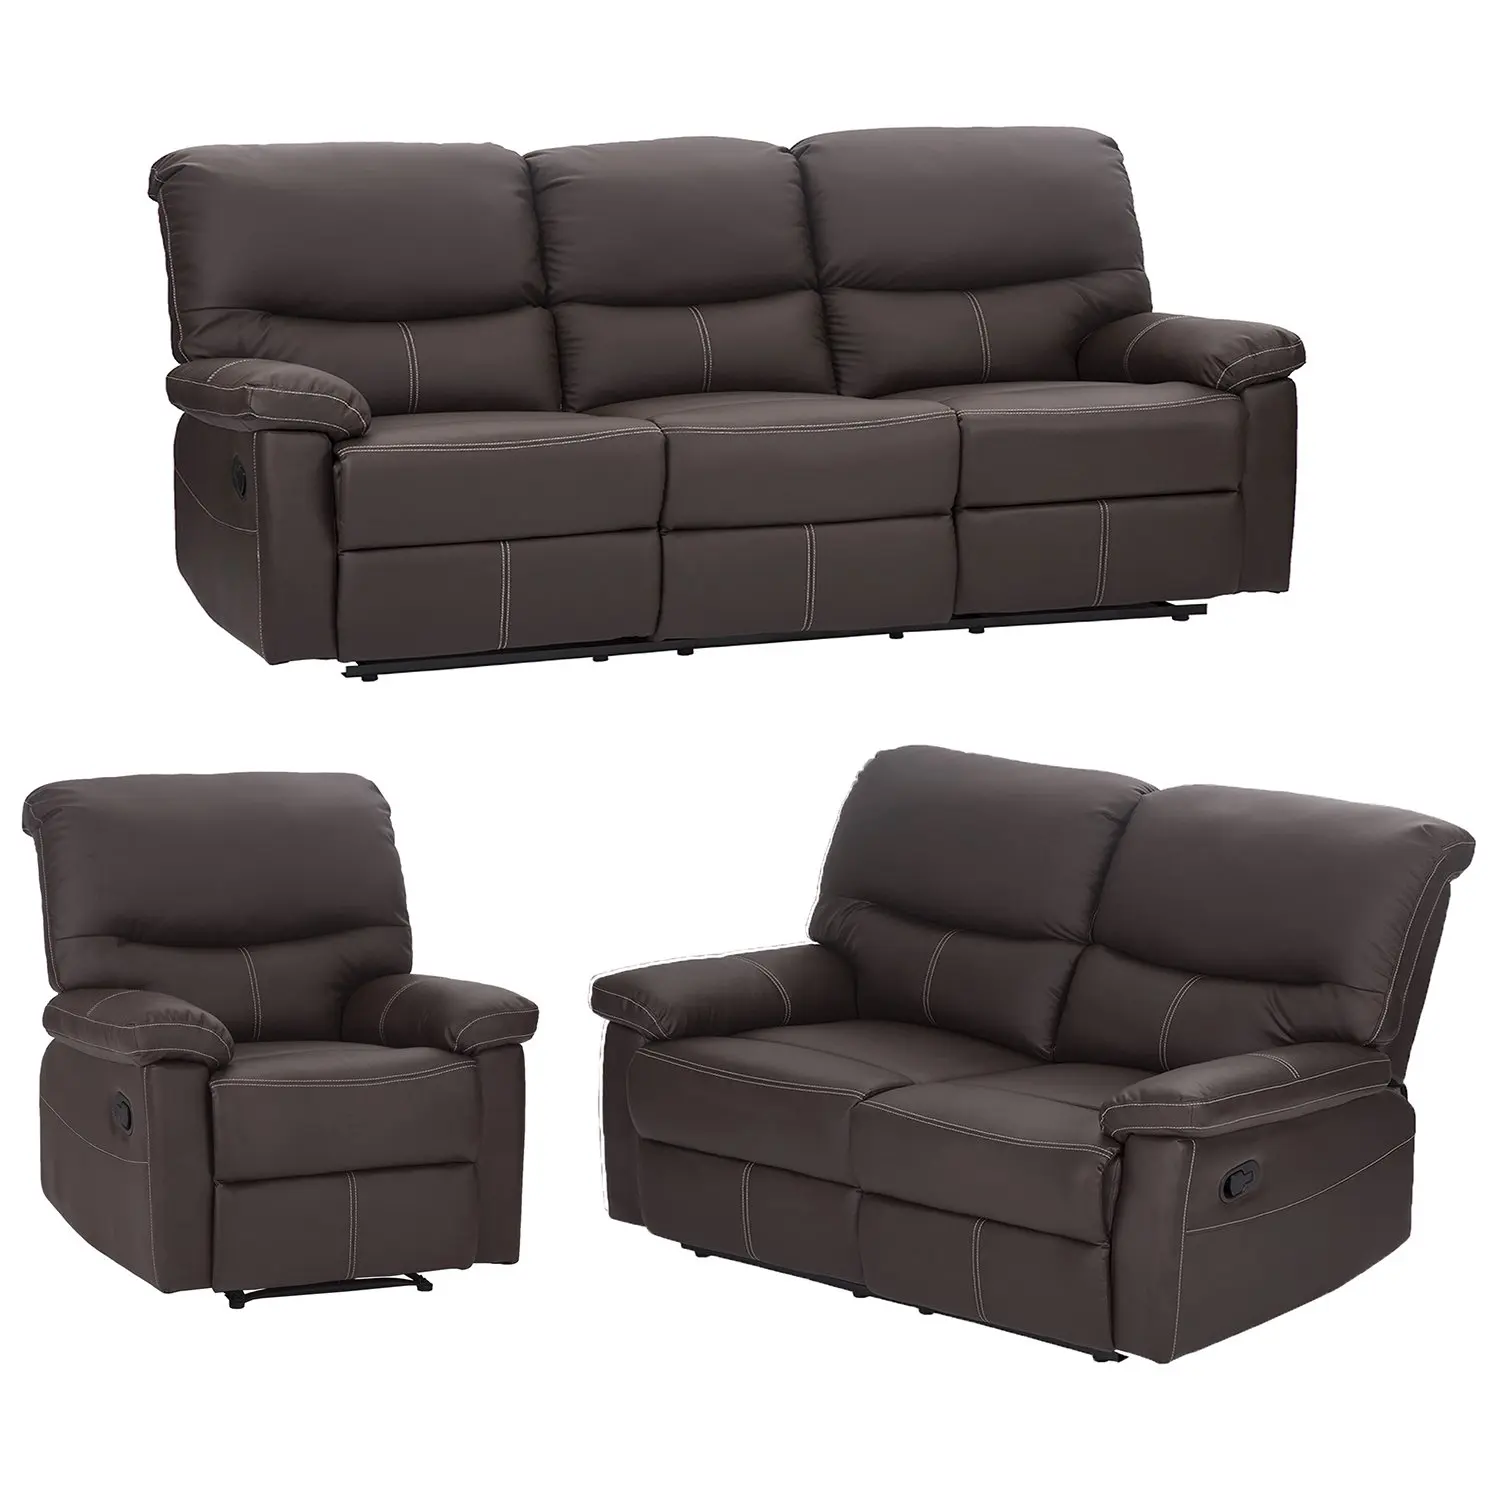 Buy BestMassage Living Room Sofa Set Recliner Sofa Reclining Couch Home